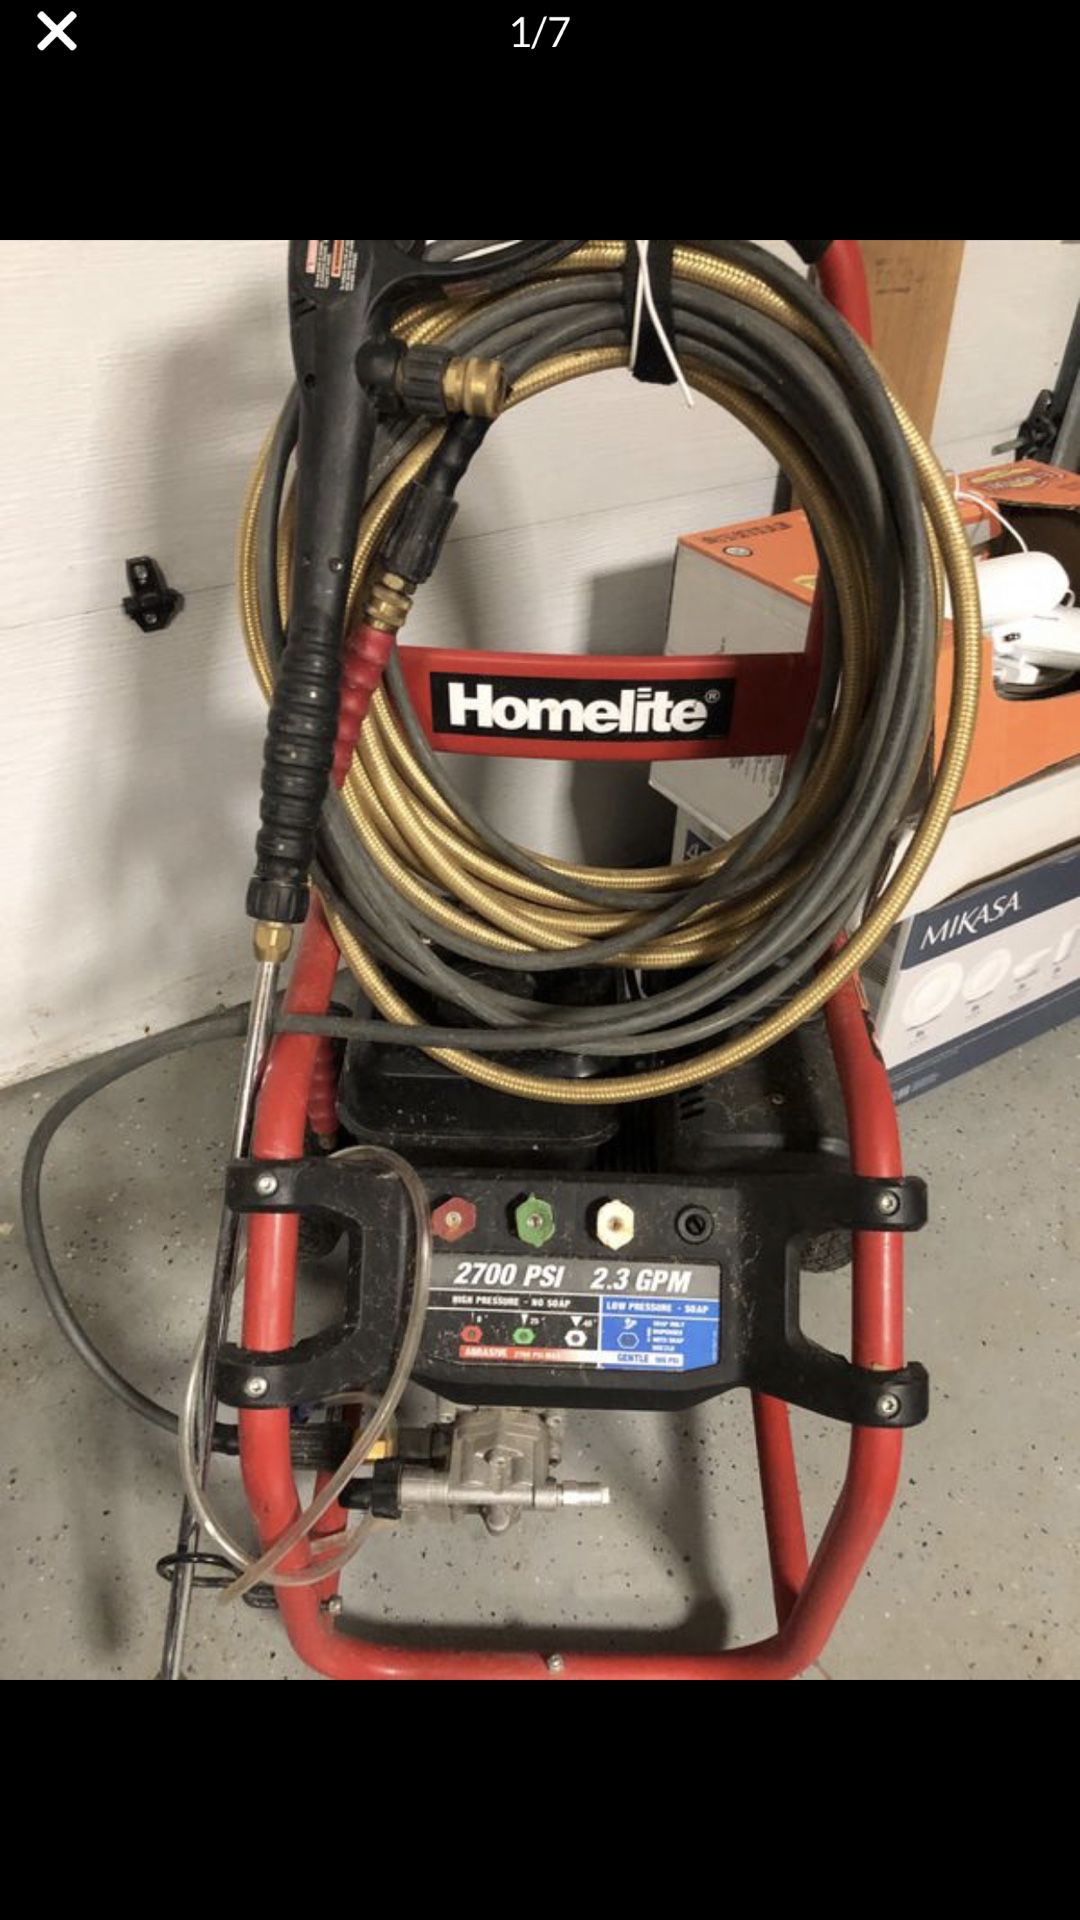 Home line pressure washer 2700 psi needs work It starts but dies after a few seconds